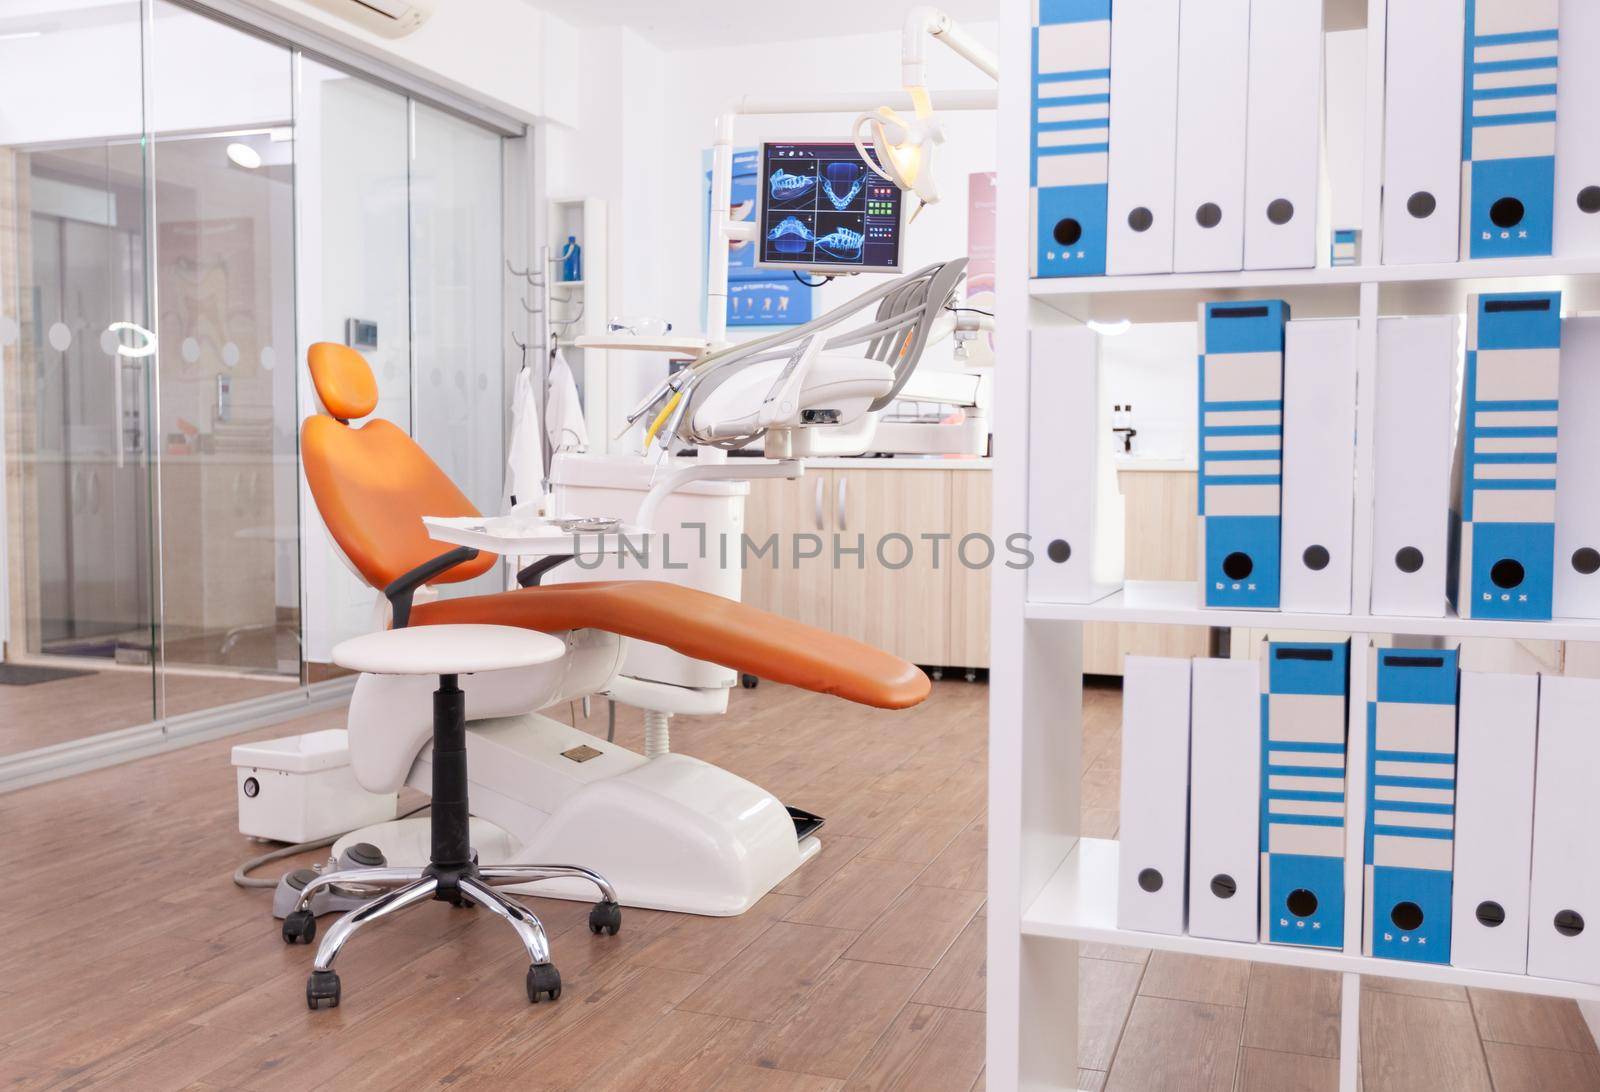 Empty stomatology orthodontic office room with nobody in it by DCStudio